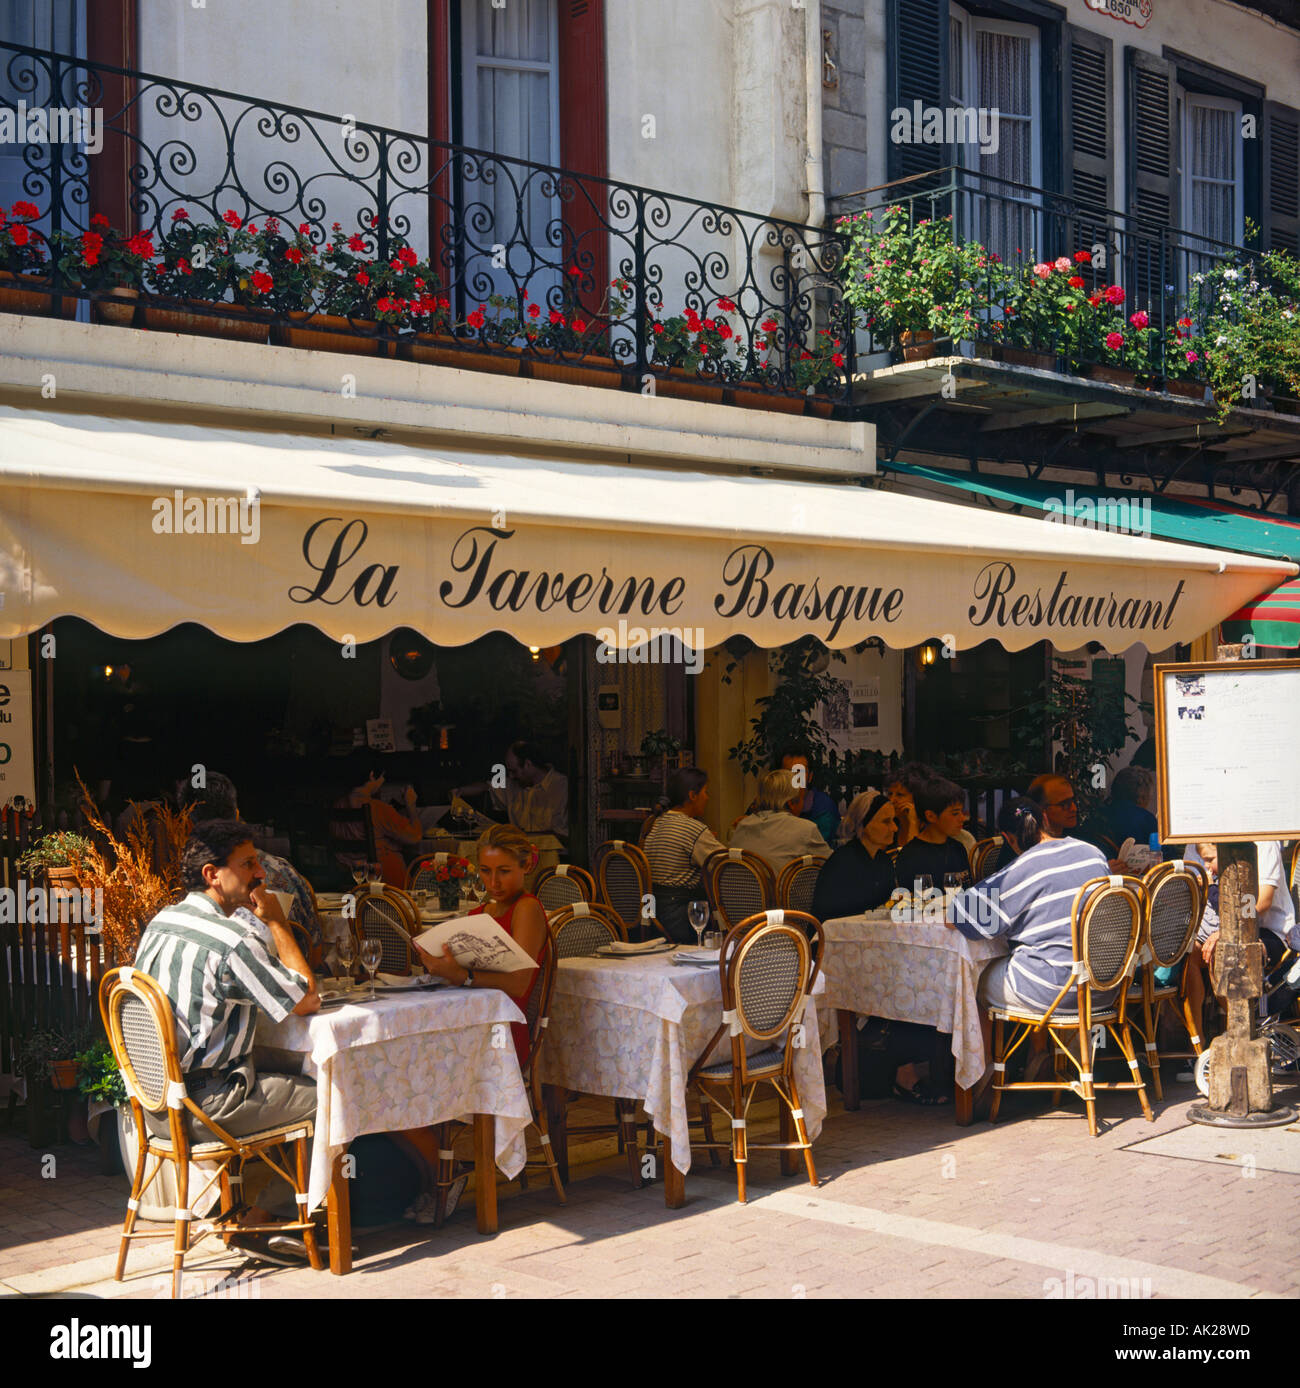 A typical French scene of people dining out doors at La Taverne Basque  Restaurant St Jean-de-Luz France Stock Photo - Alamy